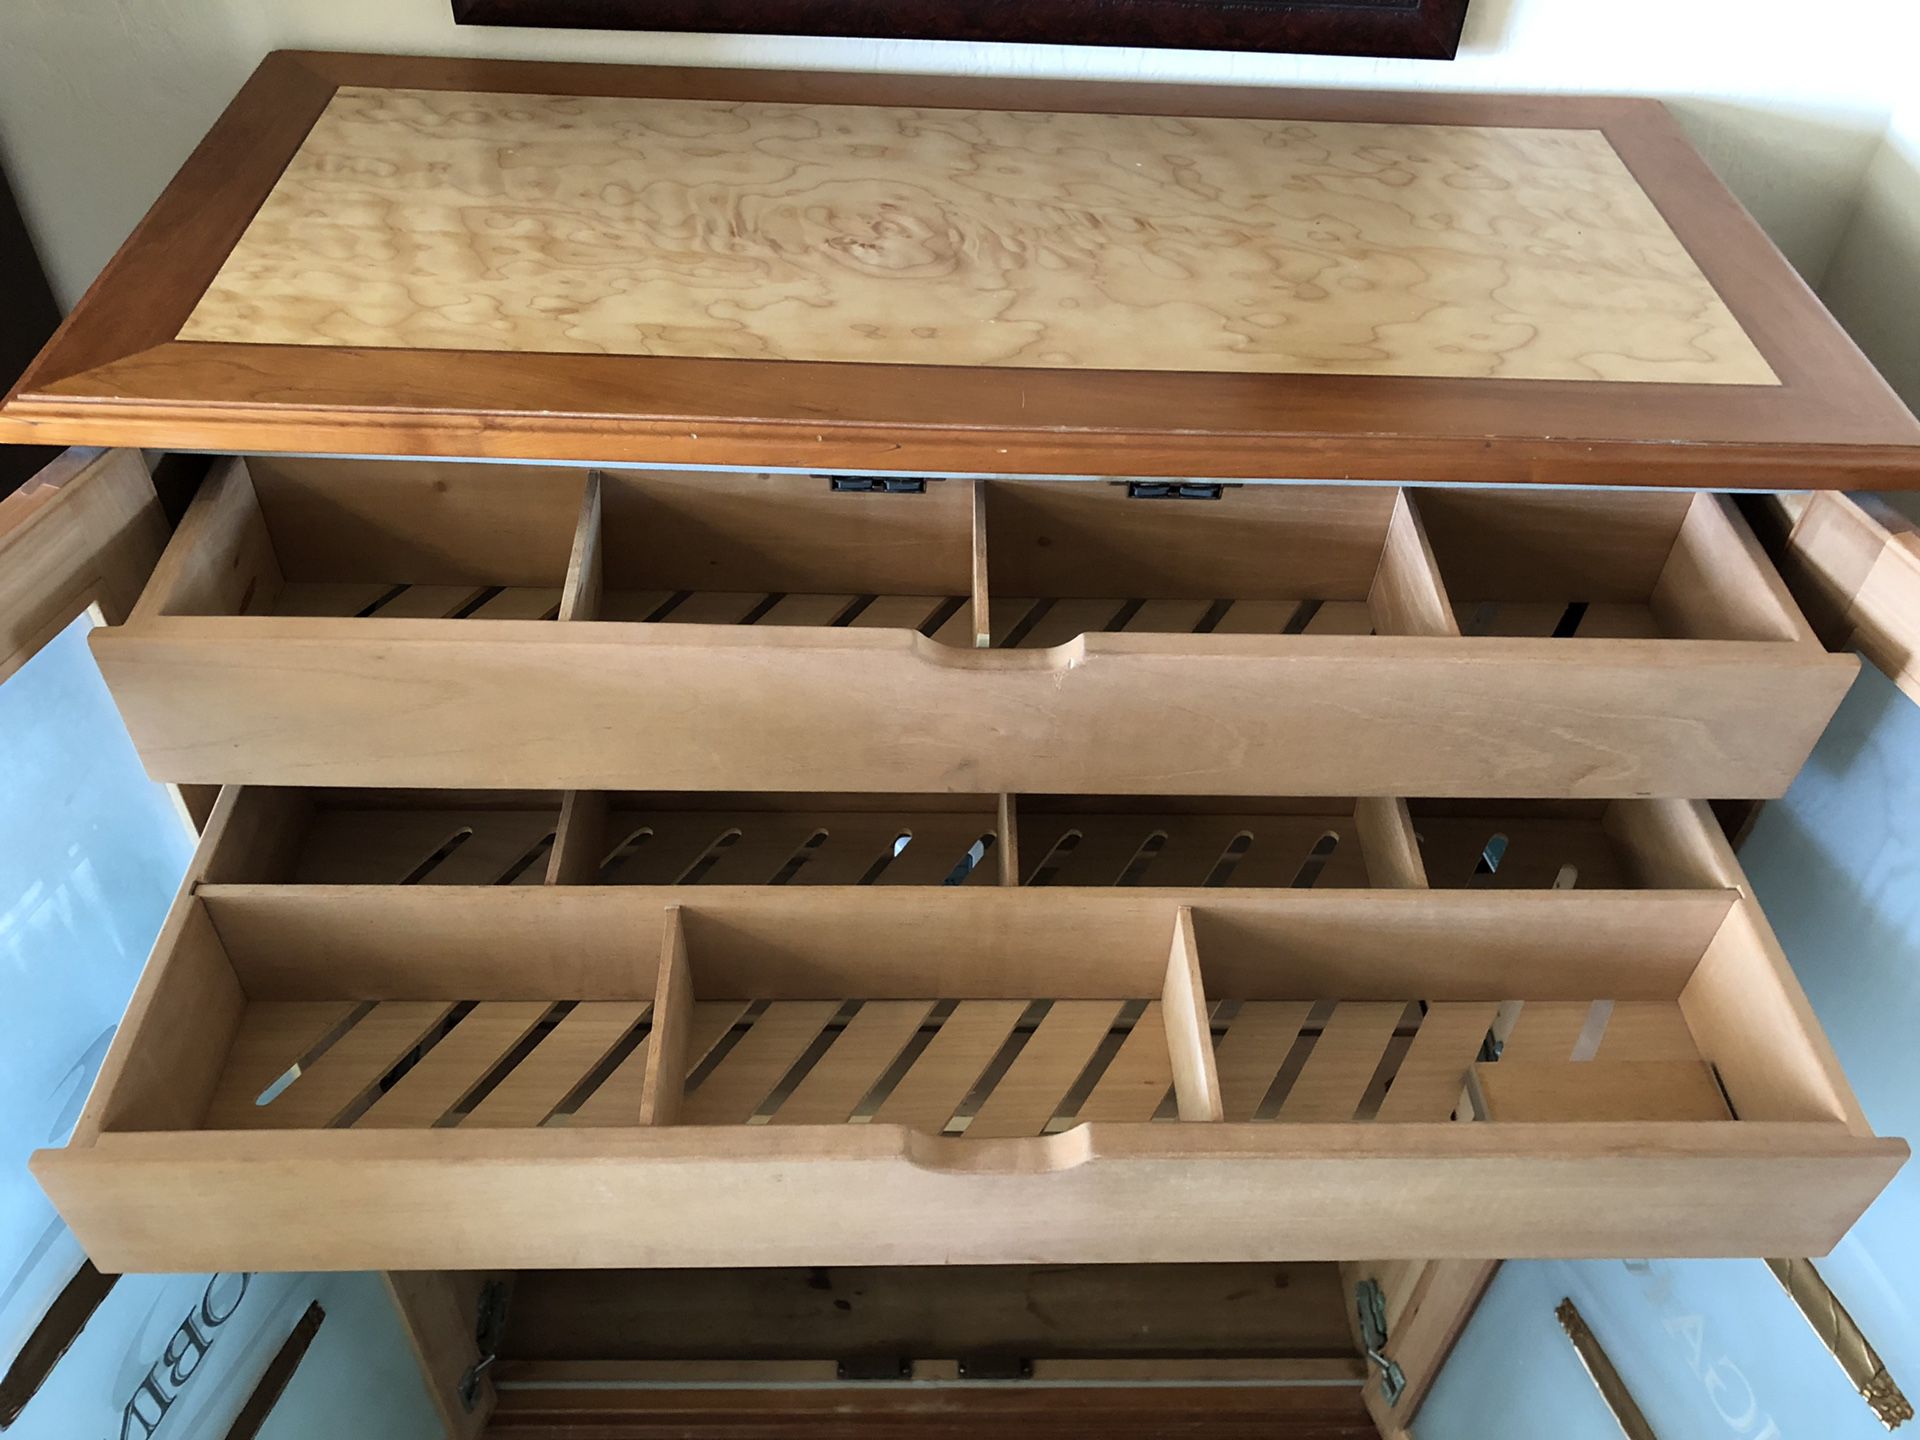 Aristocrat M Crown Cabinet Humidor for Sale - OfferUp